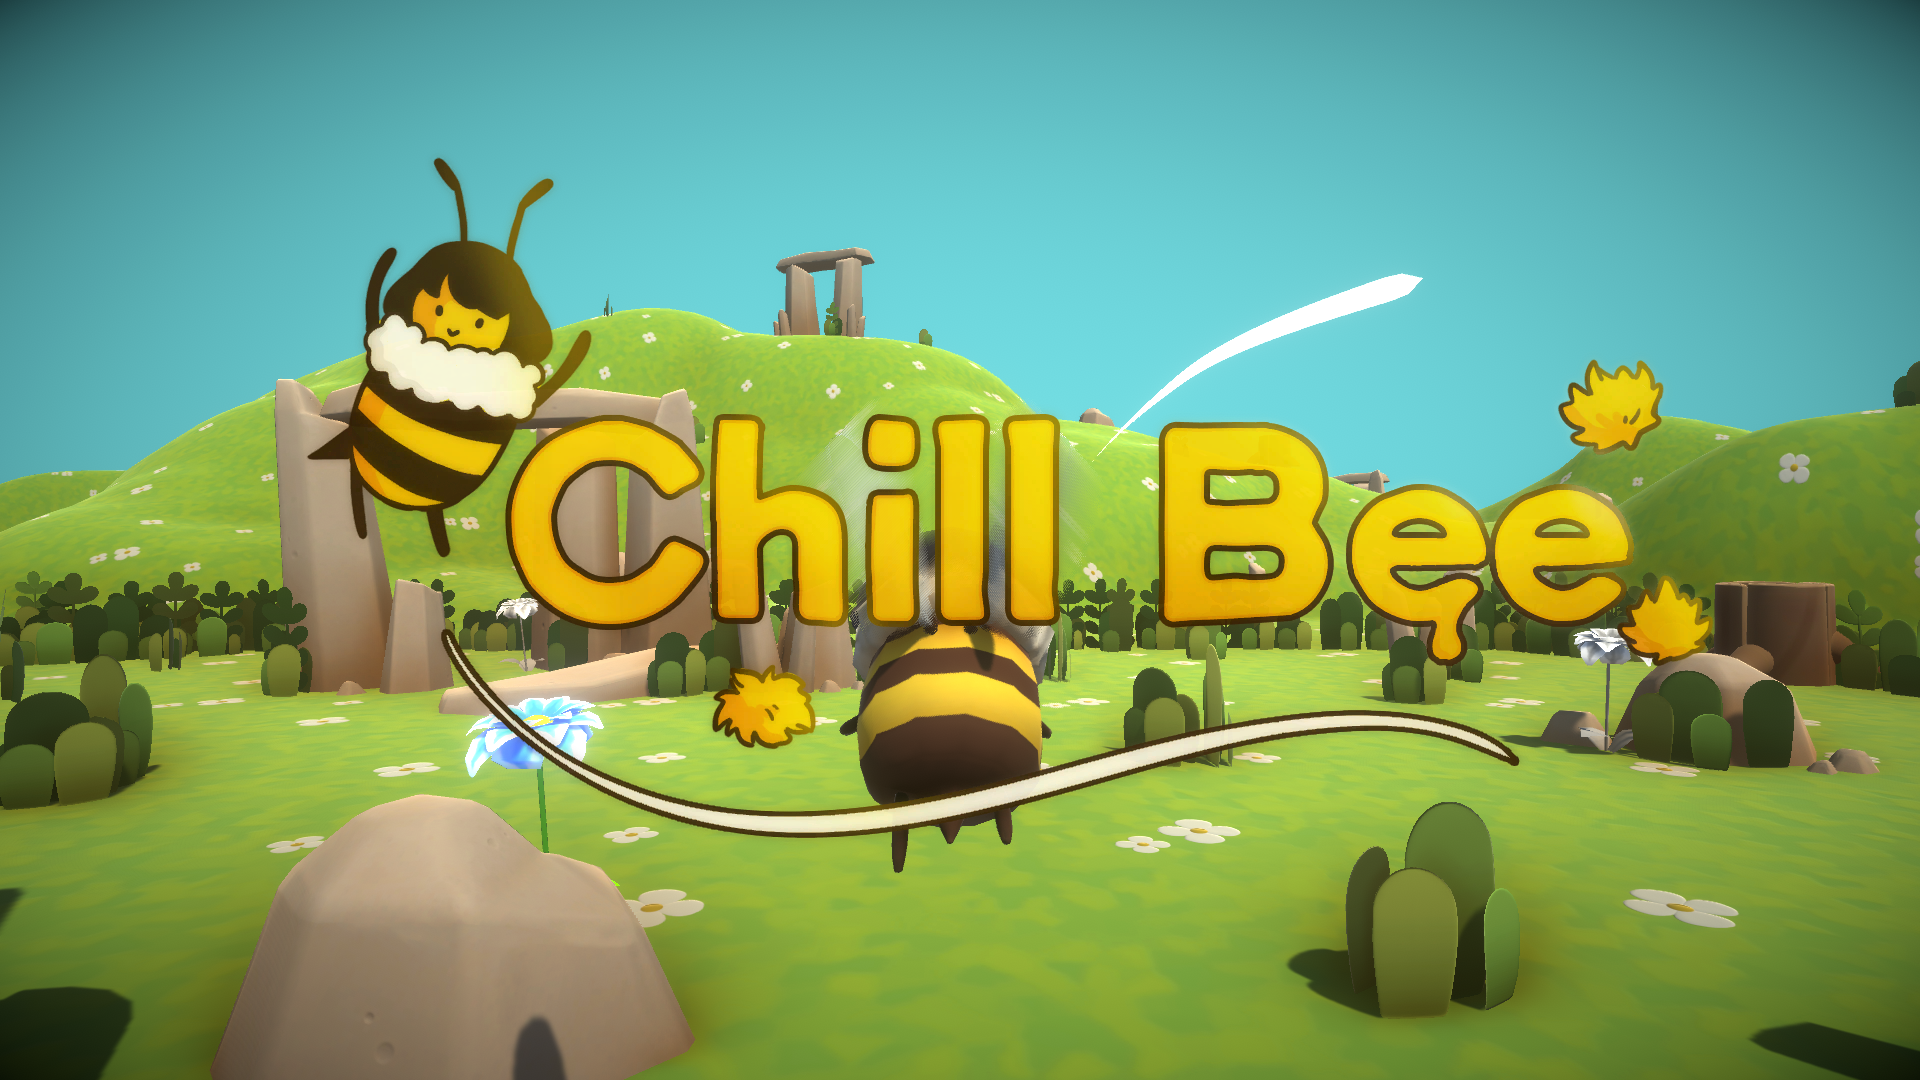 Chill bee